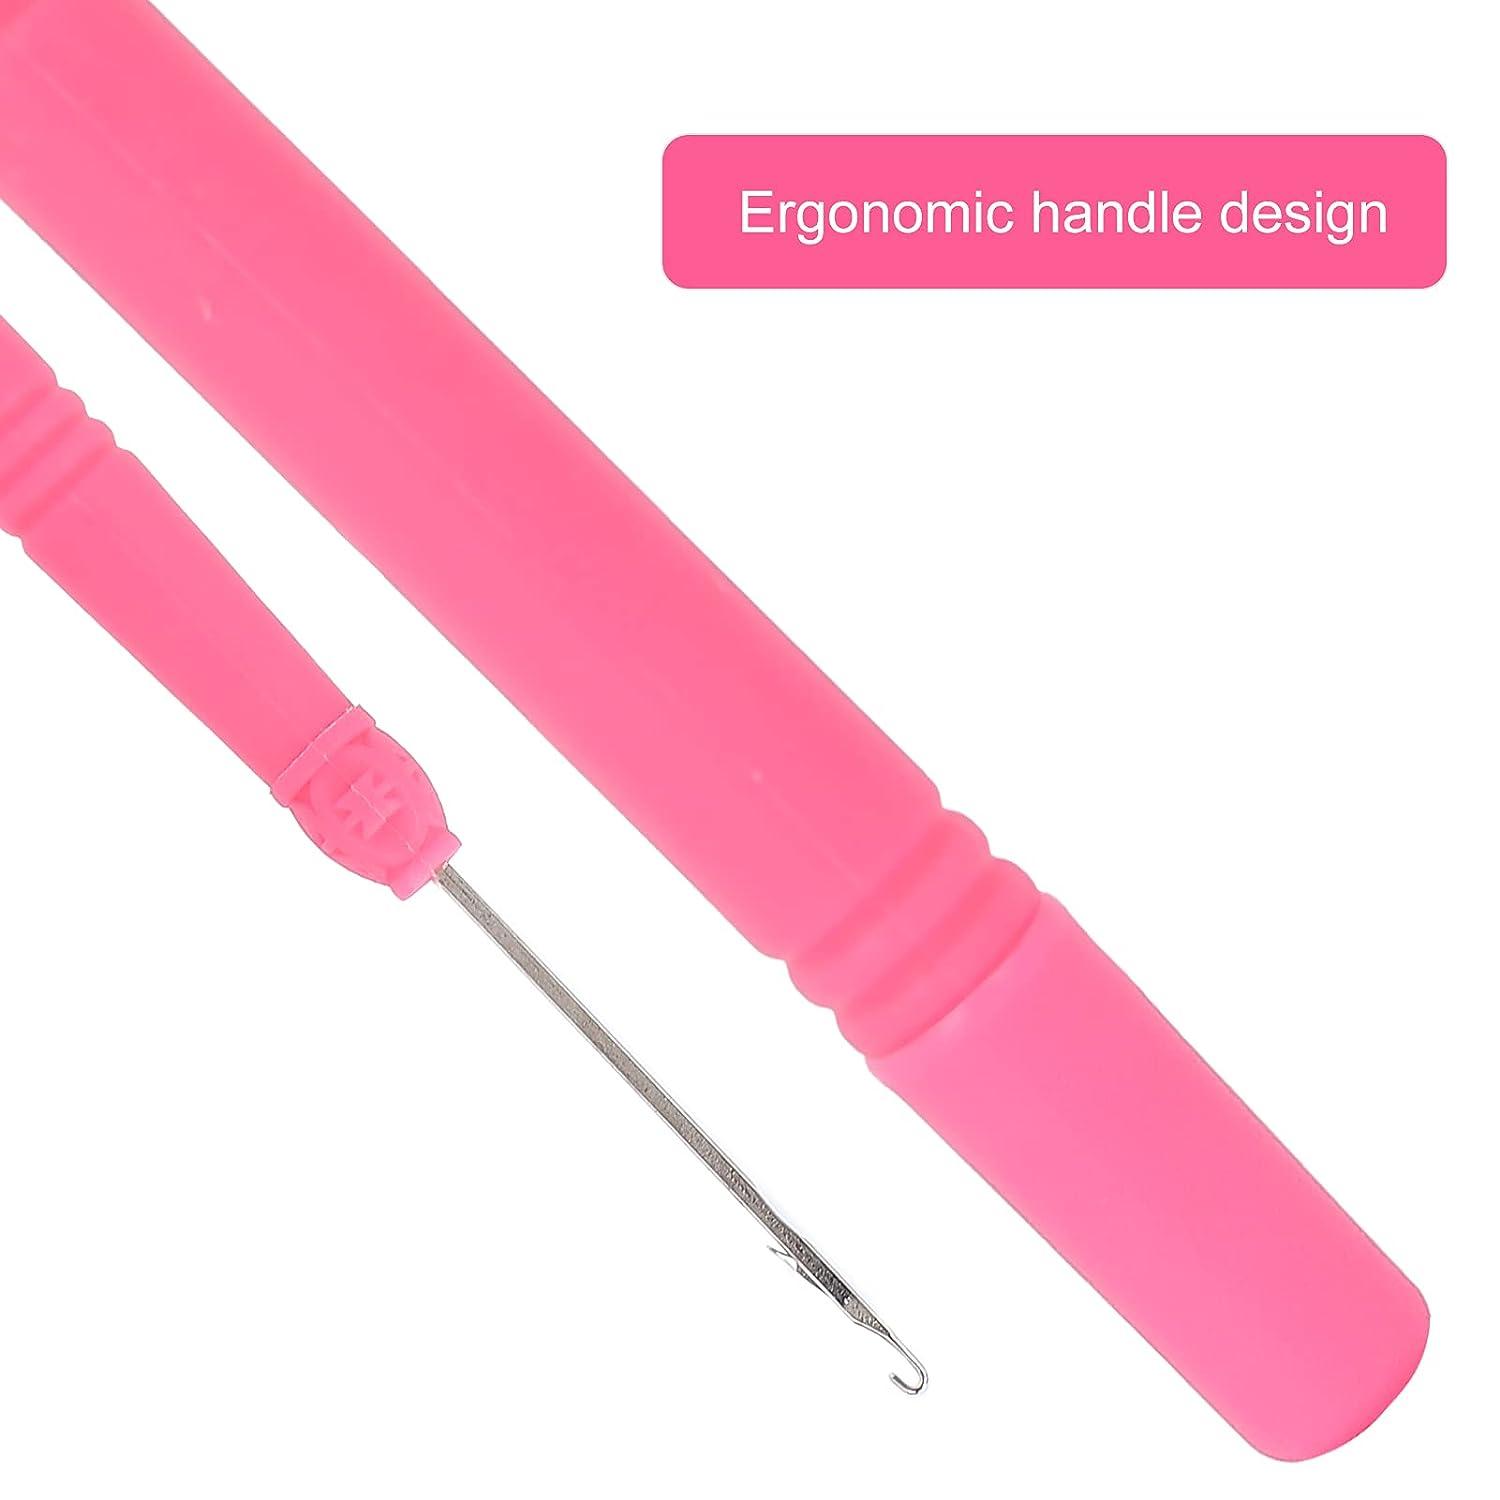 Crochet Hook for Hair Weaving and Extensions Latch Hook for Braids